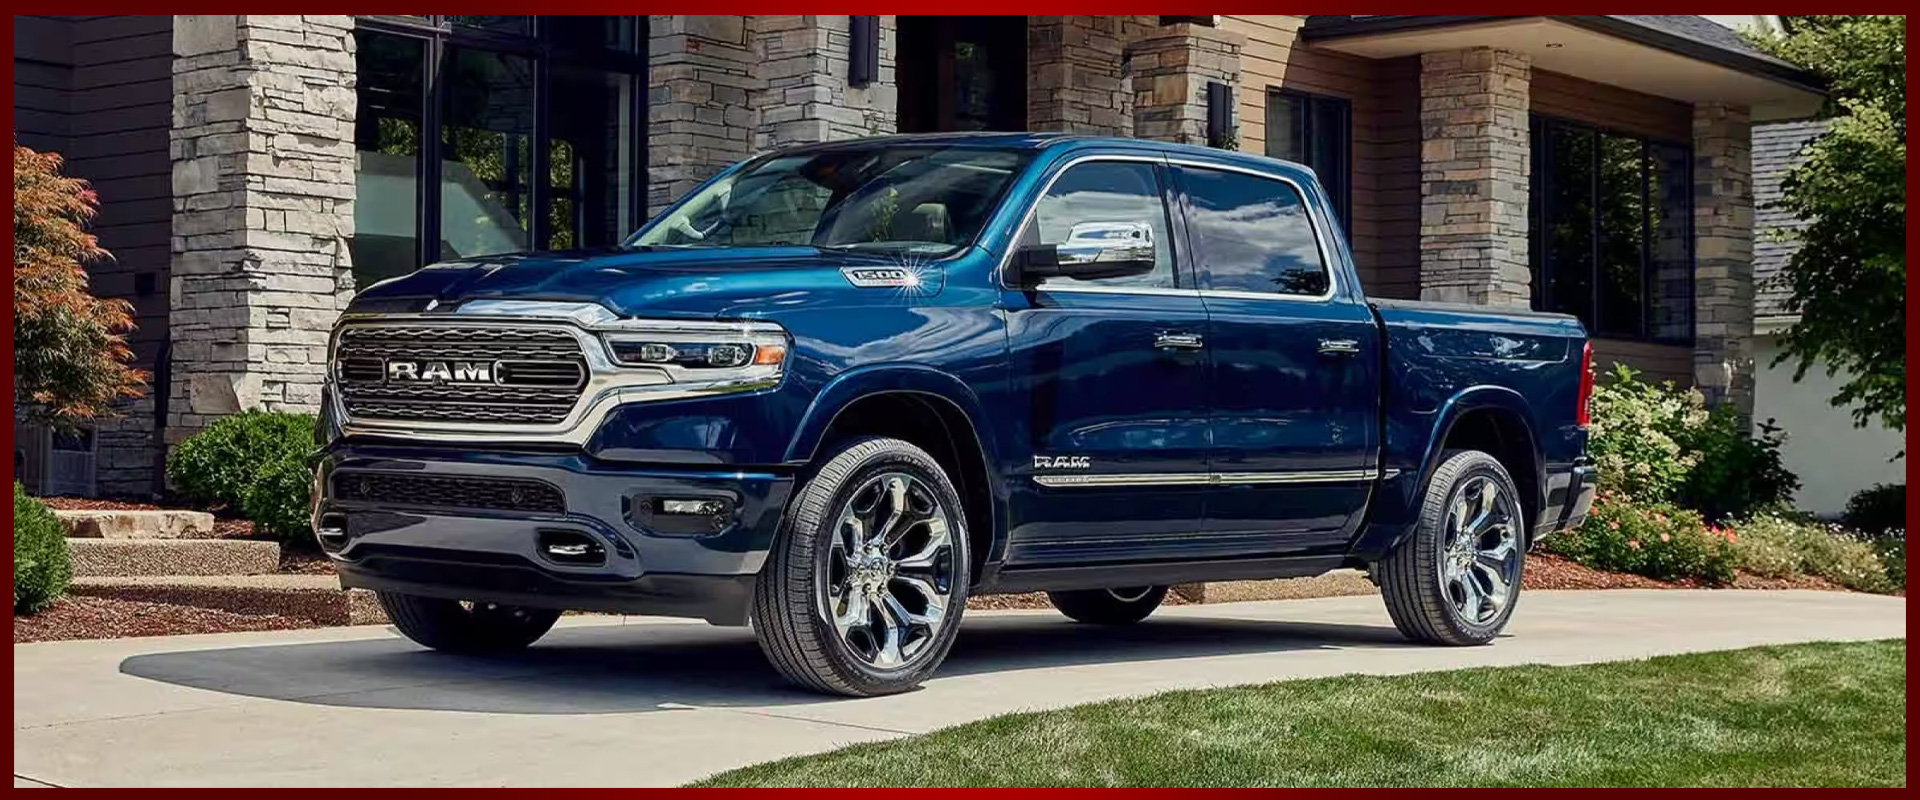 Limited Ram 1500 Editions